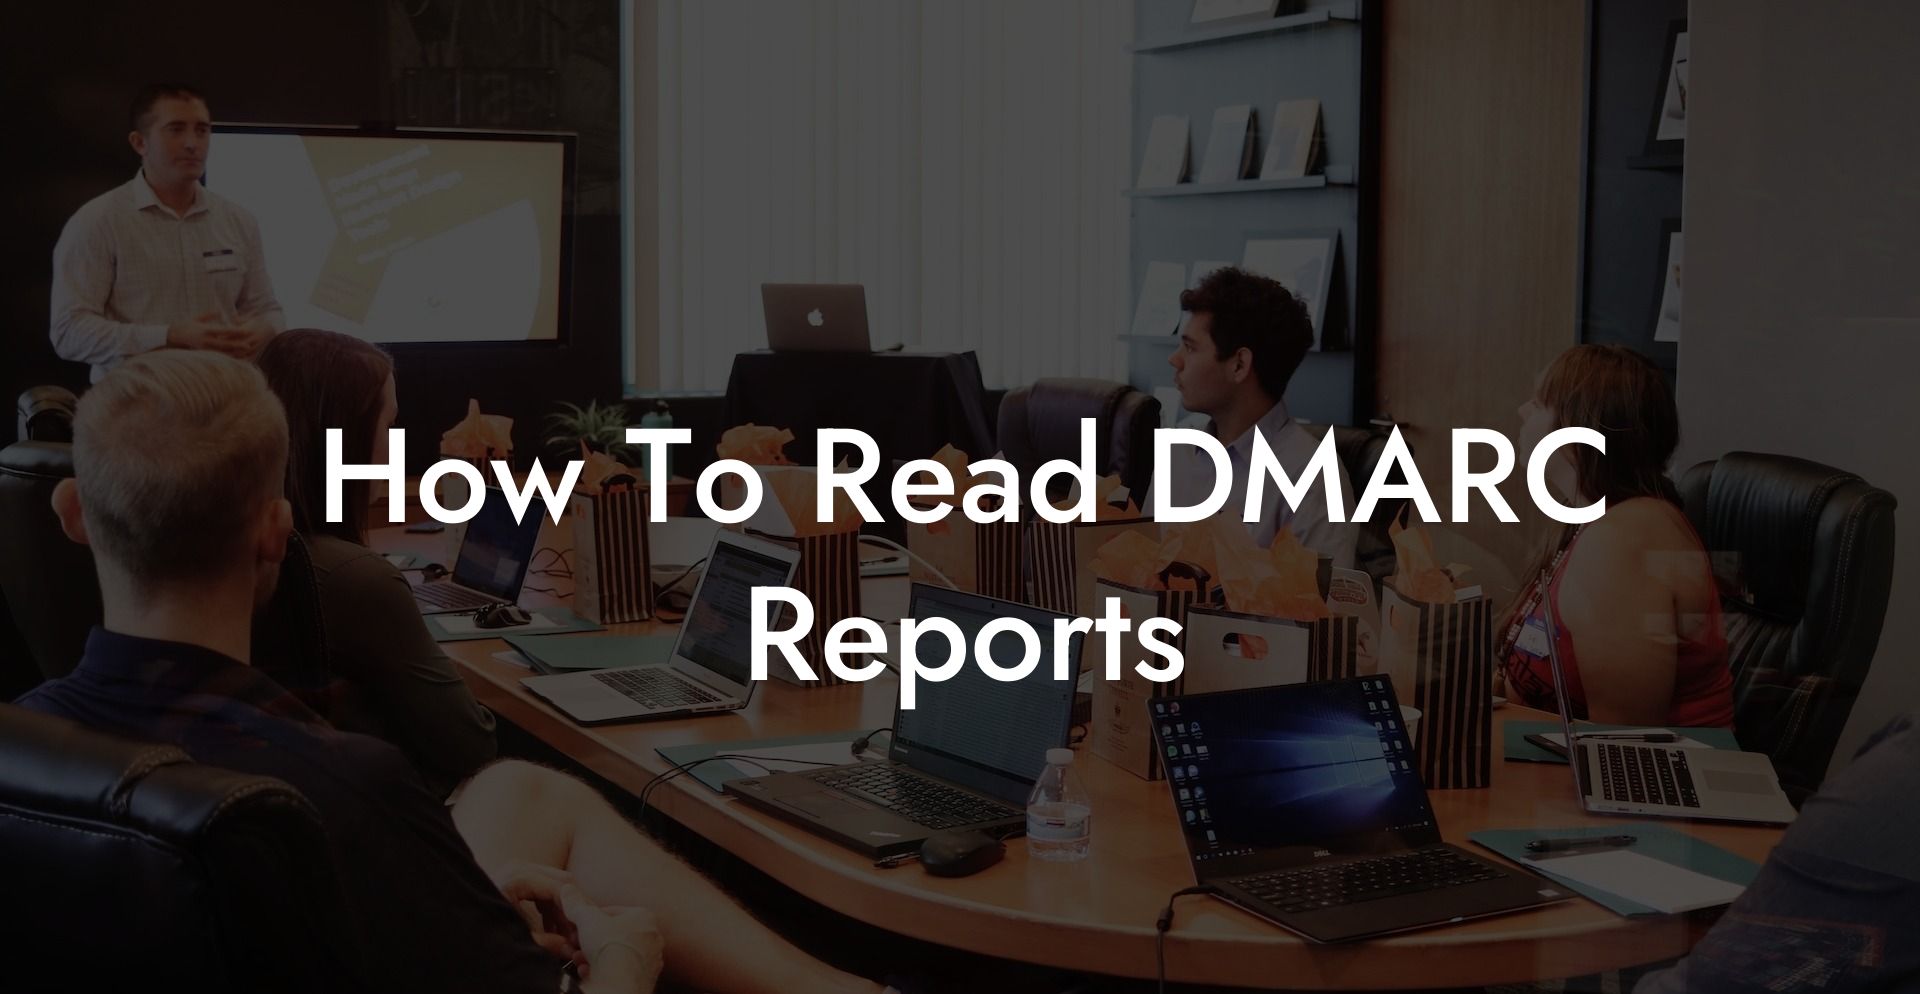 How To Read DMARC Reports